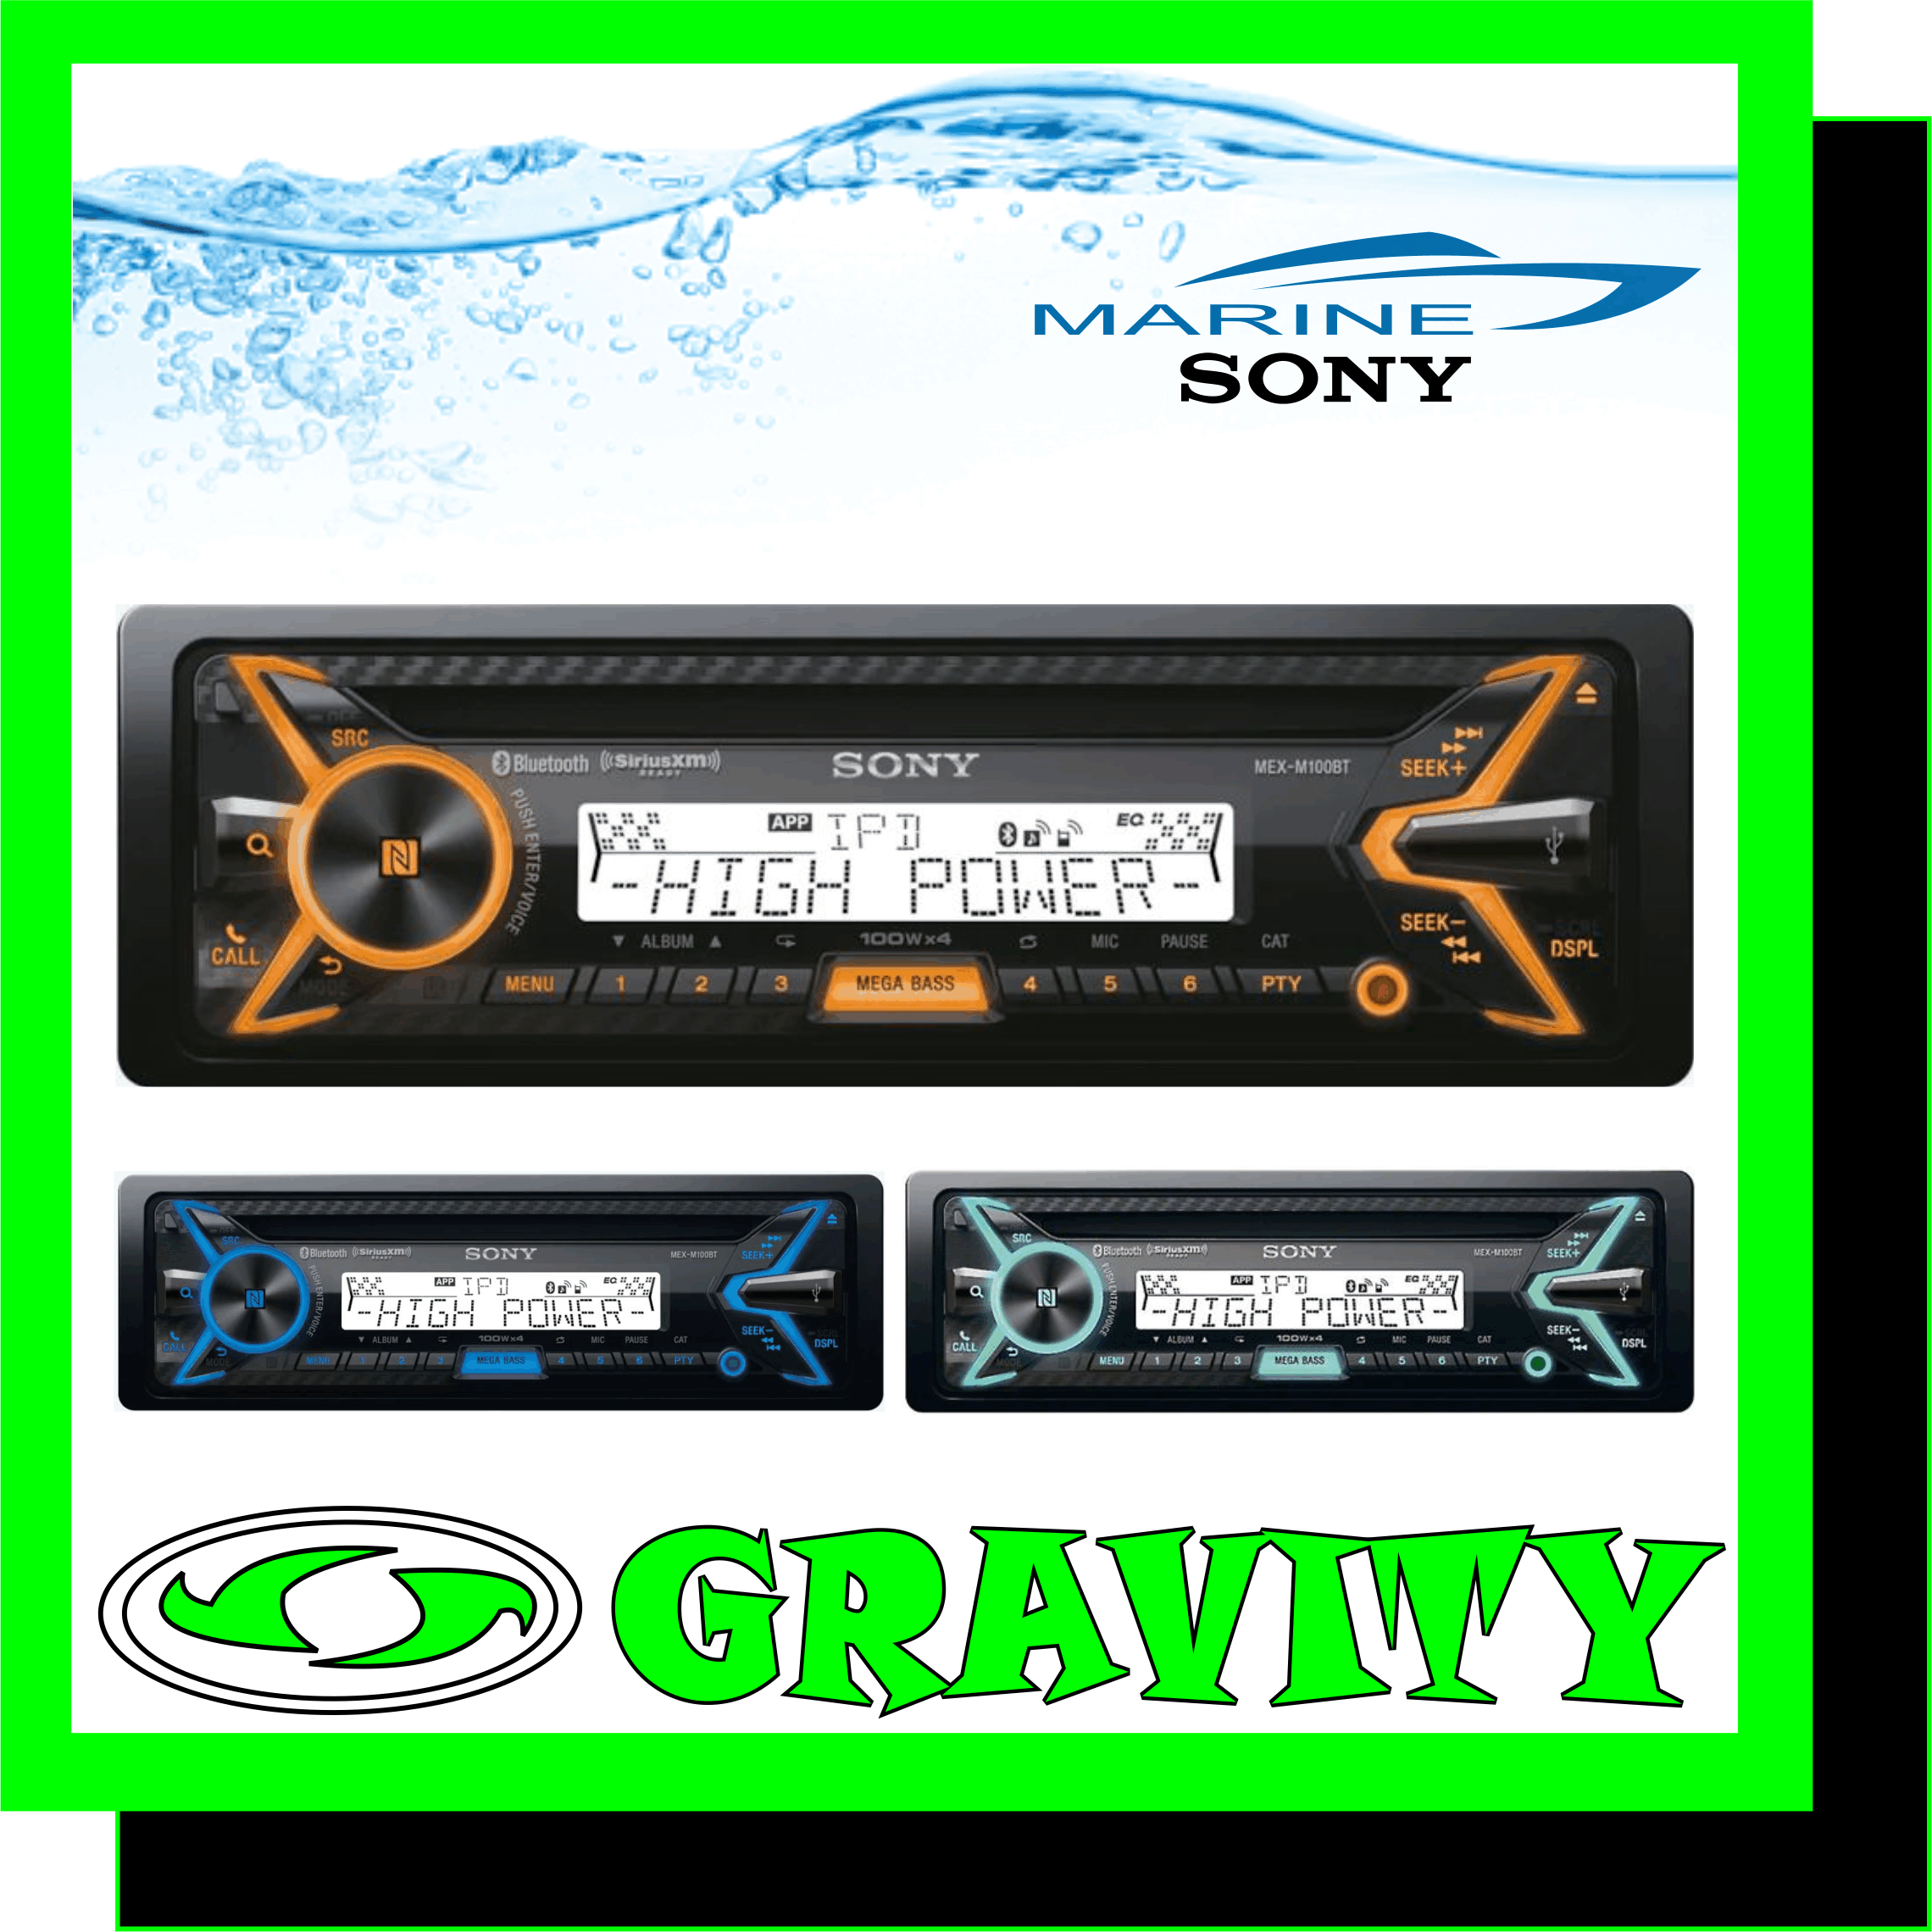 MEX-M100BT Marine CD Receiver with Bluetooth ? 100W x 4 max. power ? MEGA BASS ? 3 pre out ? 10-band equaliser ? High-pass filter/low-pass filter ? DSEE ? AAC, FLAC, MP3, WAV, WMA playback  CD Receiver with BLUETOOTH� Wireless Technology  SPECIFICATIONS Take all of your favorite music on the water with this CD receiver designed specifically for marine use. Enjoy high power and detail in everything you listen to thanks to DSEE upscaling and an incredible 100 W x 4 output, while SongPal and Siri Eyes Free give you hands-free control for Android and iOS smartphones.  General Features: USB Yes  AUX Yes (Front)  EQ Yes (EQ10)  HIGH PASS FILTER Yes (OFF/50/60/80/100/120) HIGH VOLTAGE PRE OUT  5 V  OUTPUT POWER 100 W  PRE OUT x 3  REAR / SUB INITIAL No  SUB OUT Yes